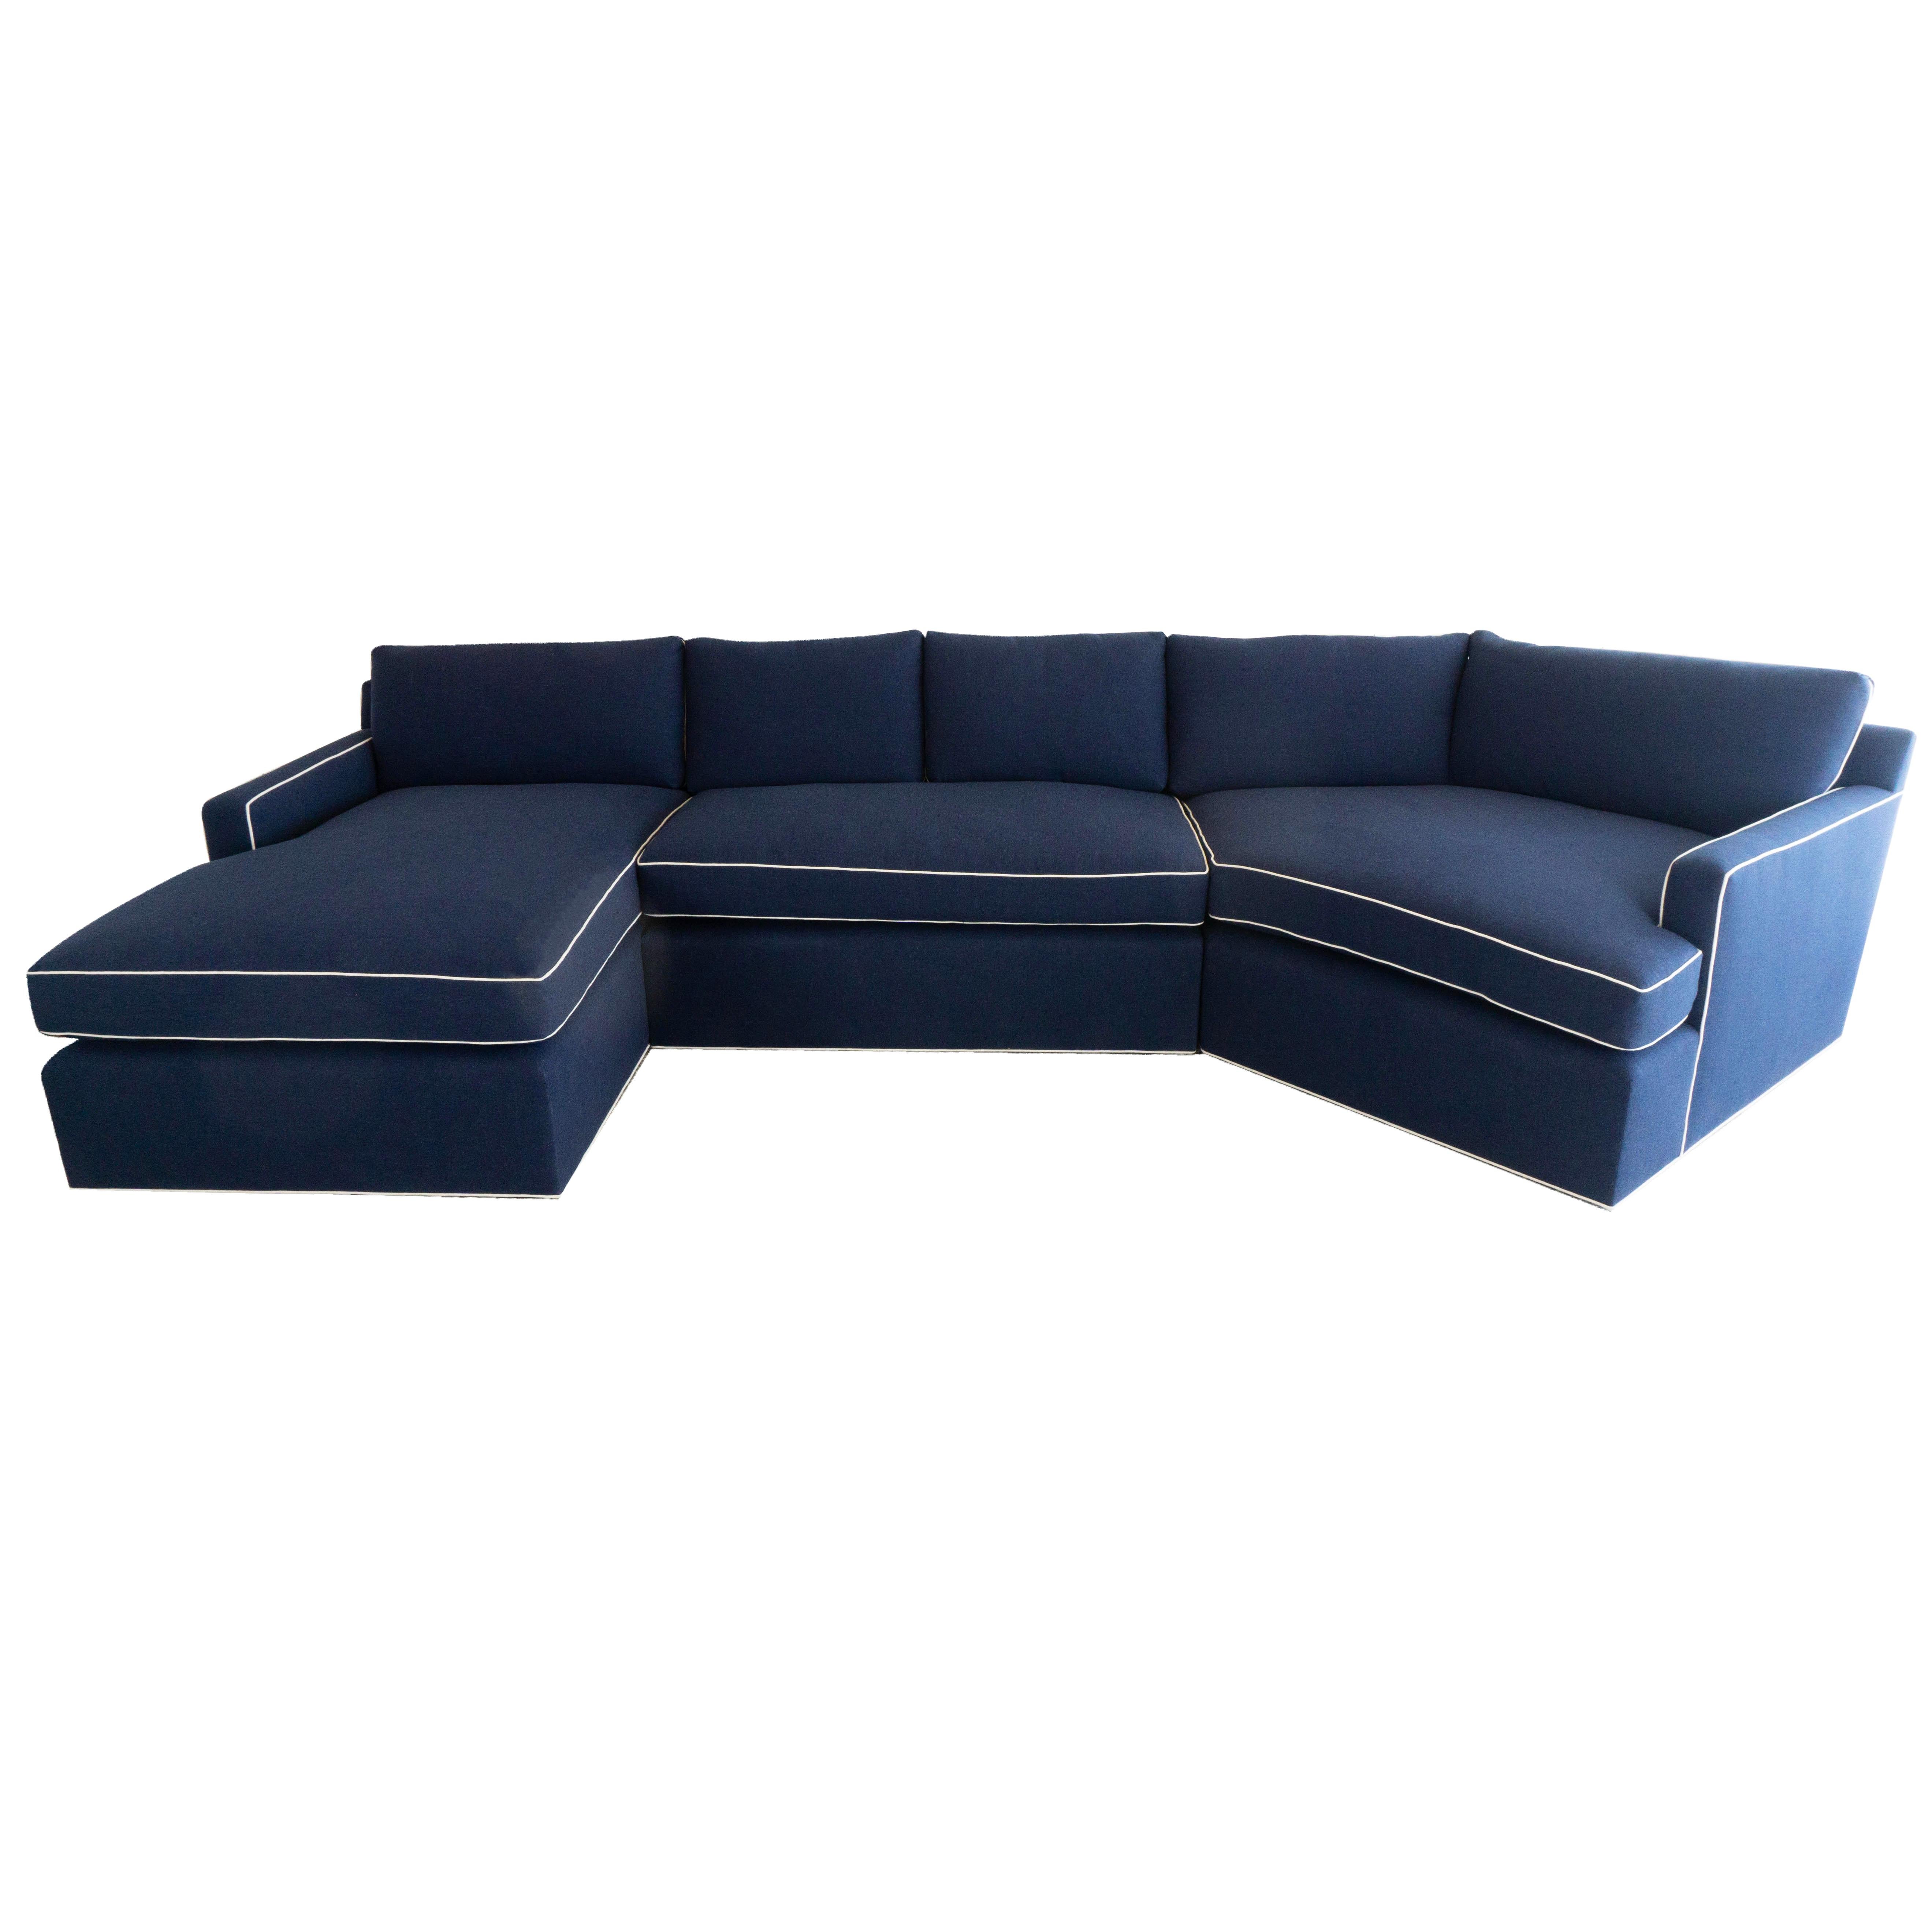 Large Custom Sectional Sofa with Chaise Lounge